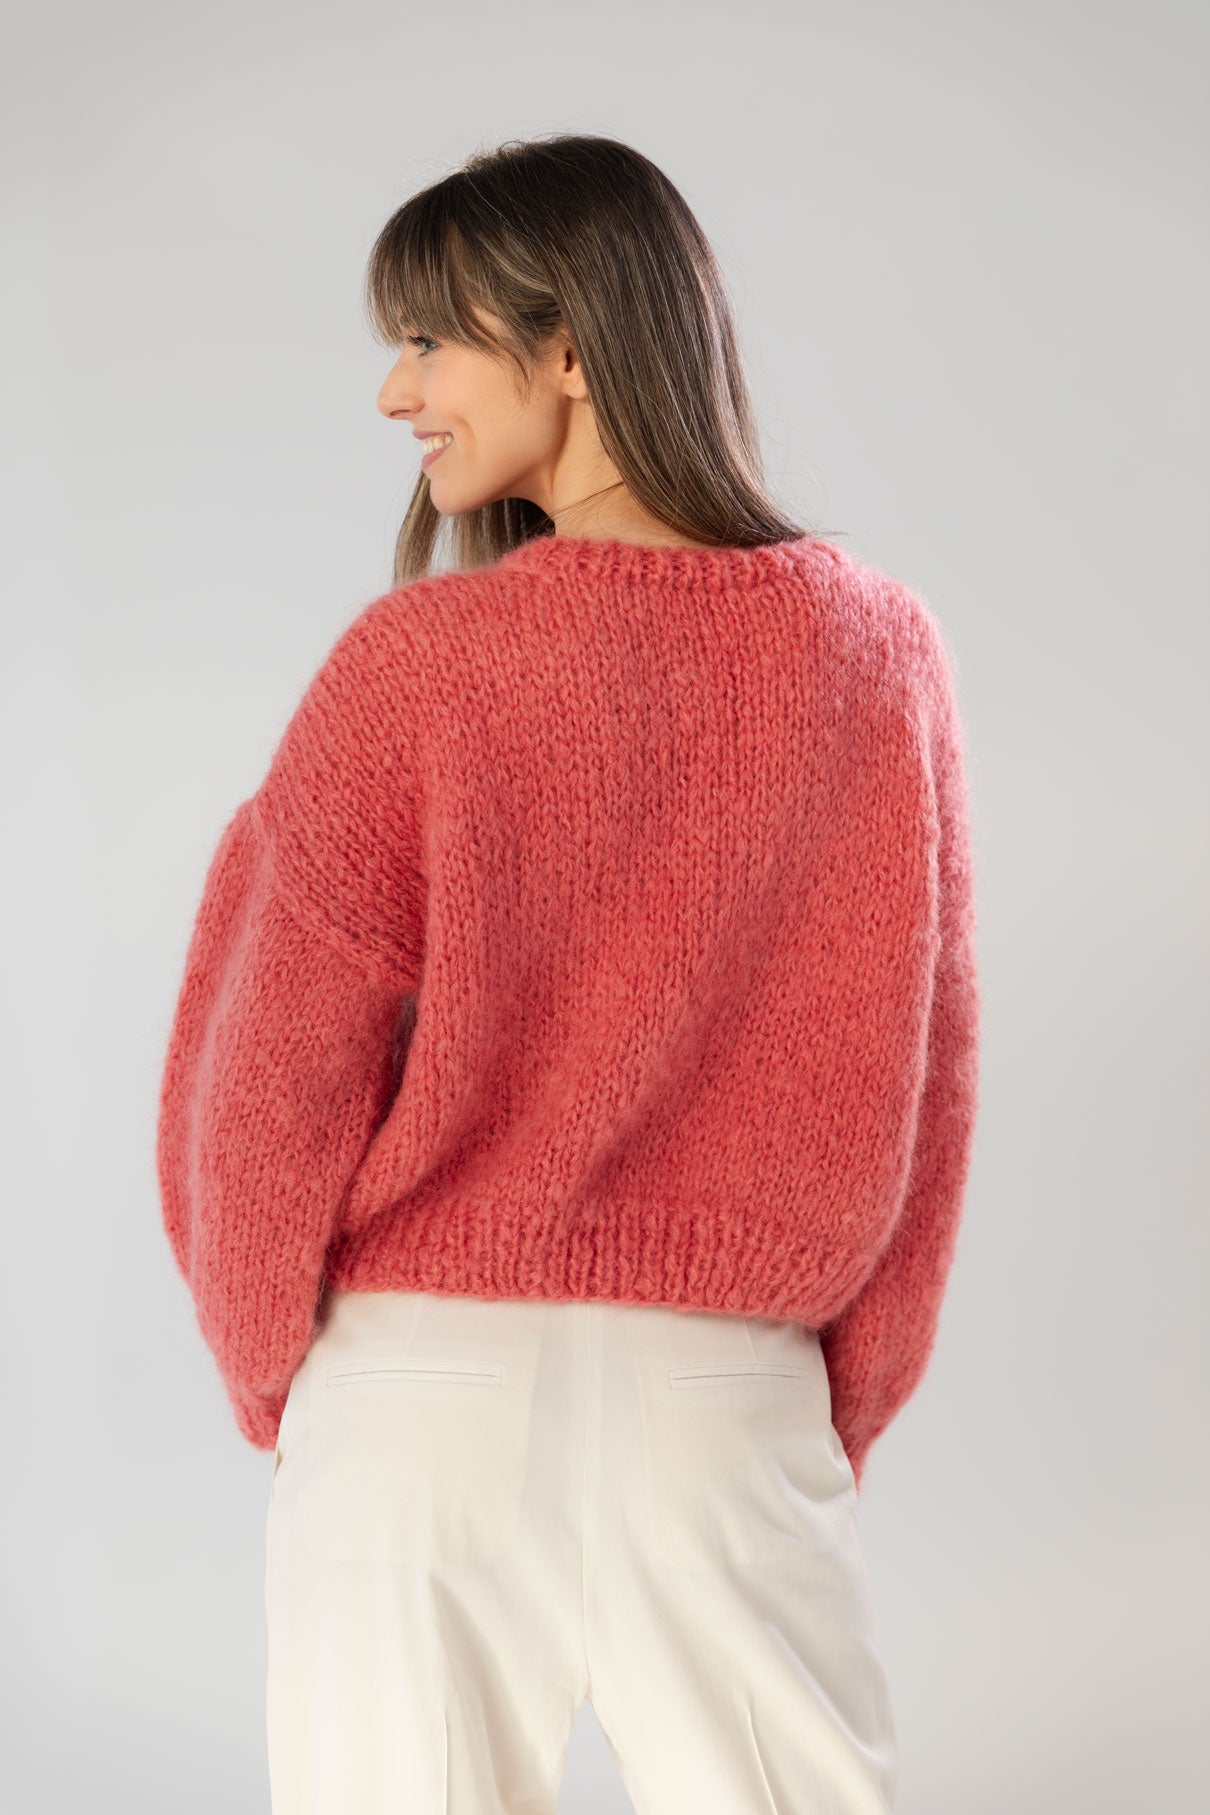 Raspberry pink mohair and organic wool sweater, oversized fit and a boxy shape.